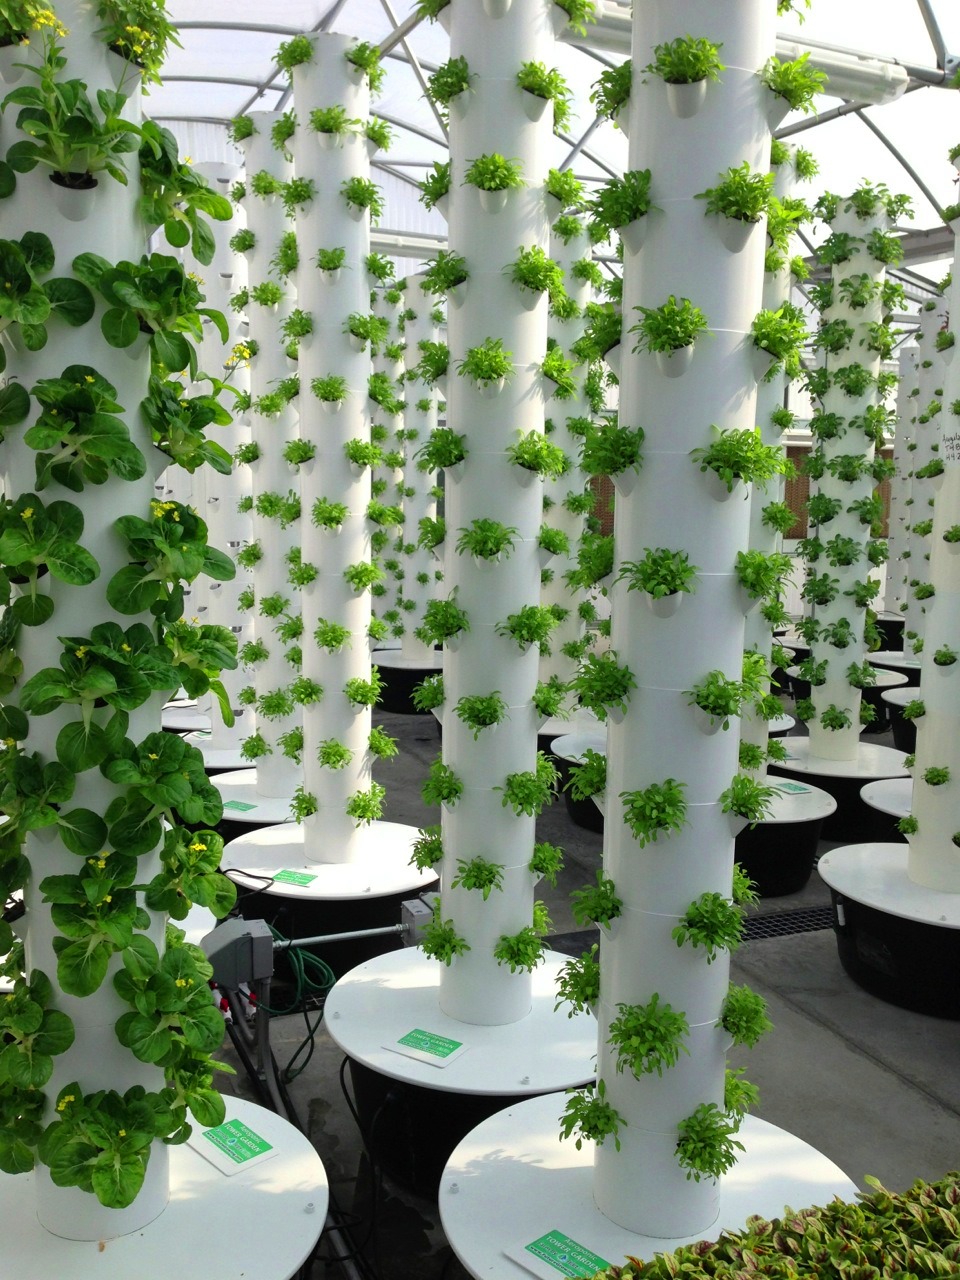 Local Tower Garden Farmer Produces Aeroponic Food for ...